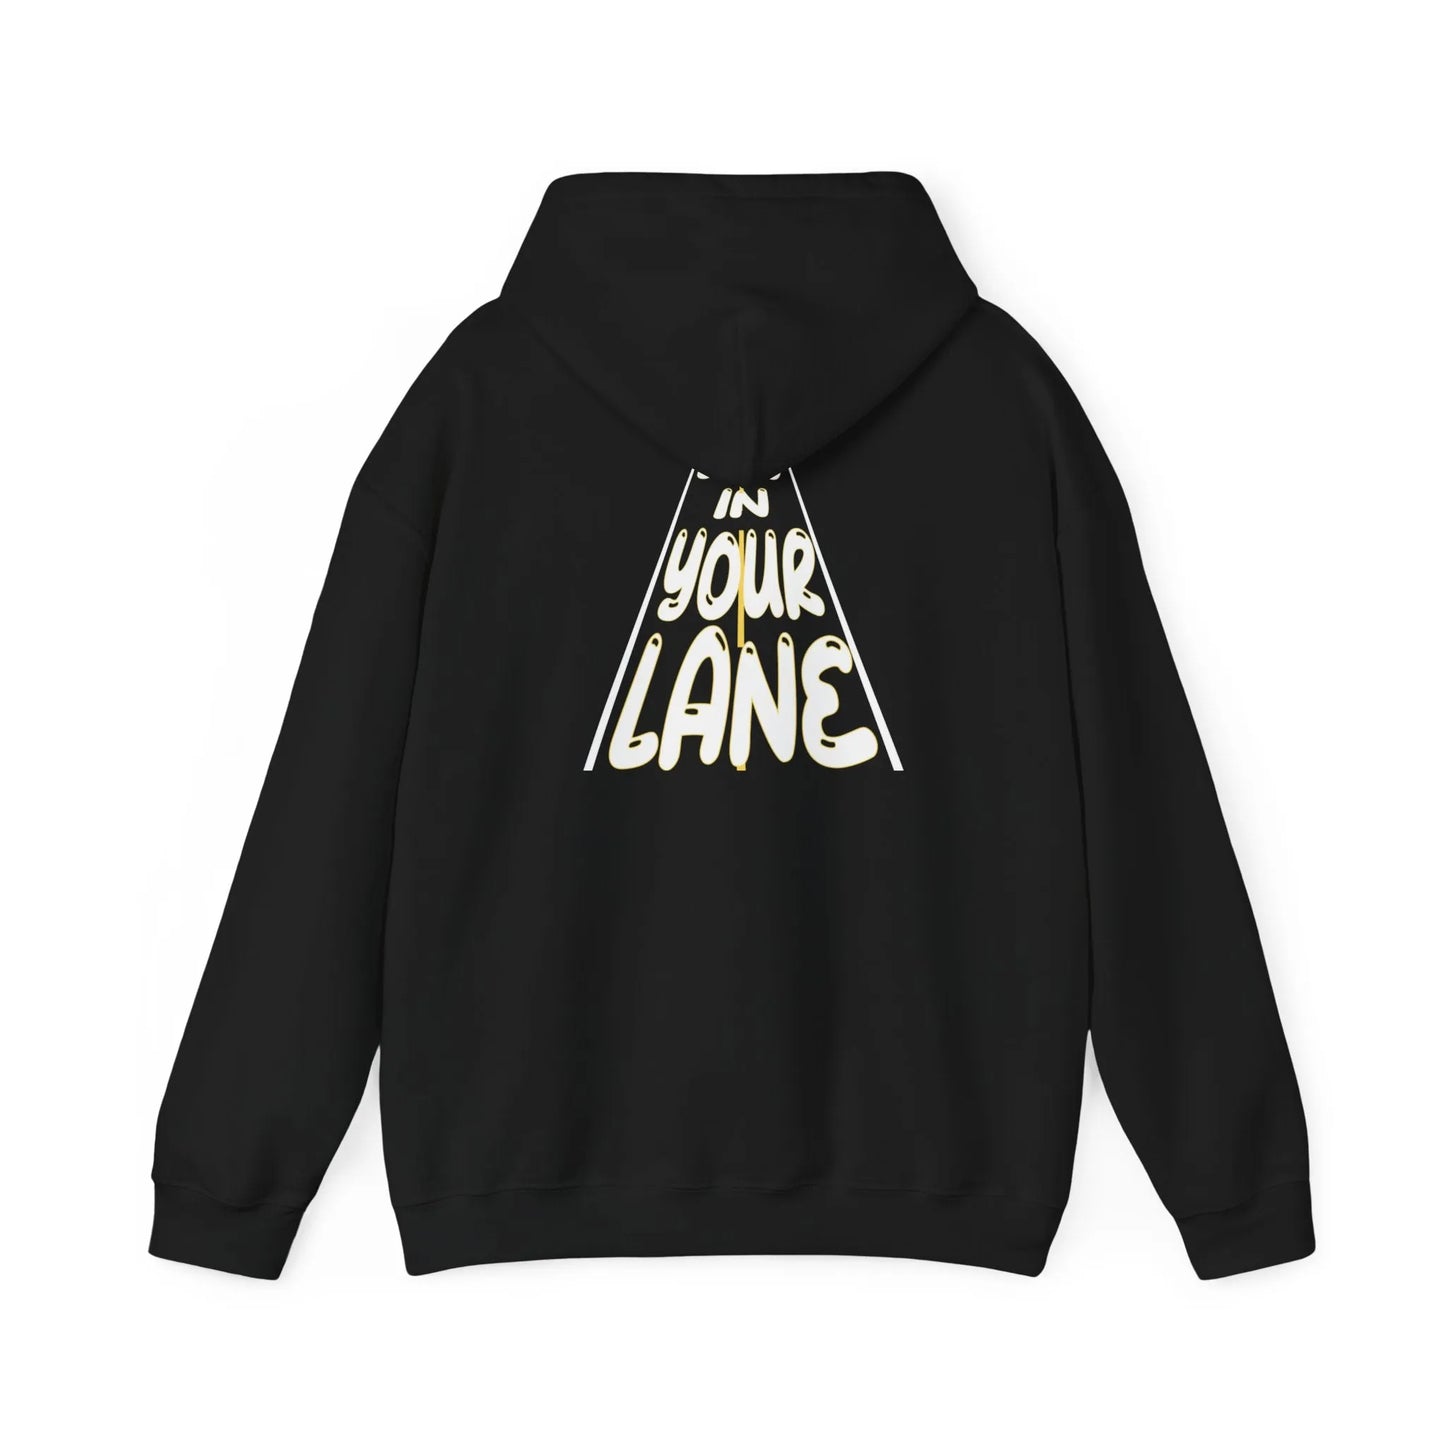 My Journey My Way: Stay In Your Lane Hooded Sweatshirt - Stay In Your Lane Sweatshirt - Trendy Graphic  Hoodie Back View Hood Down